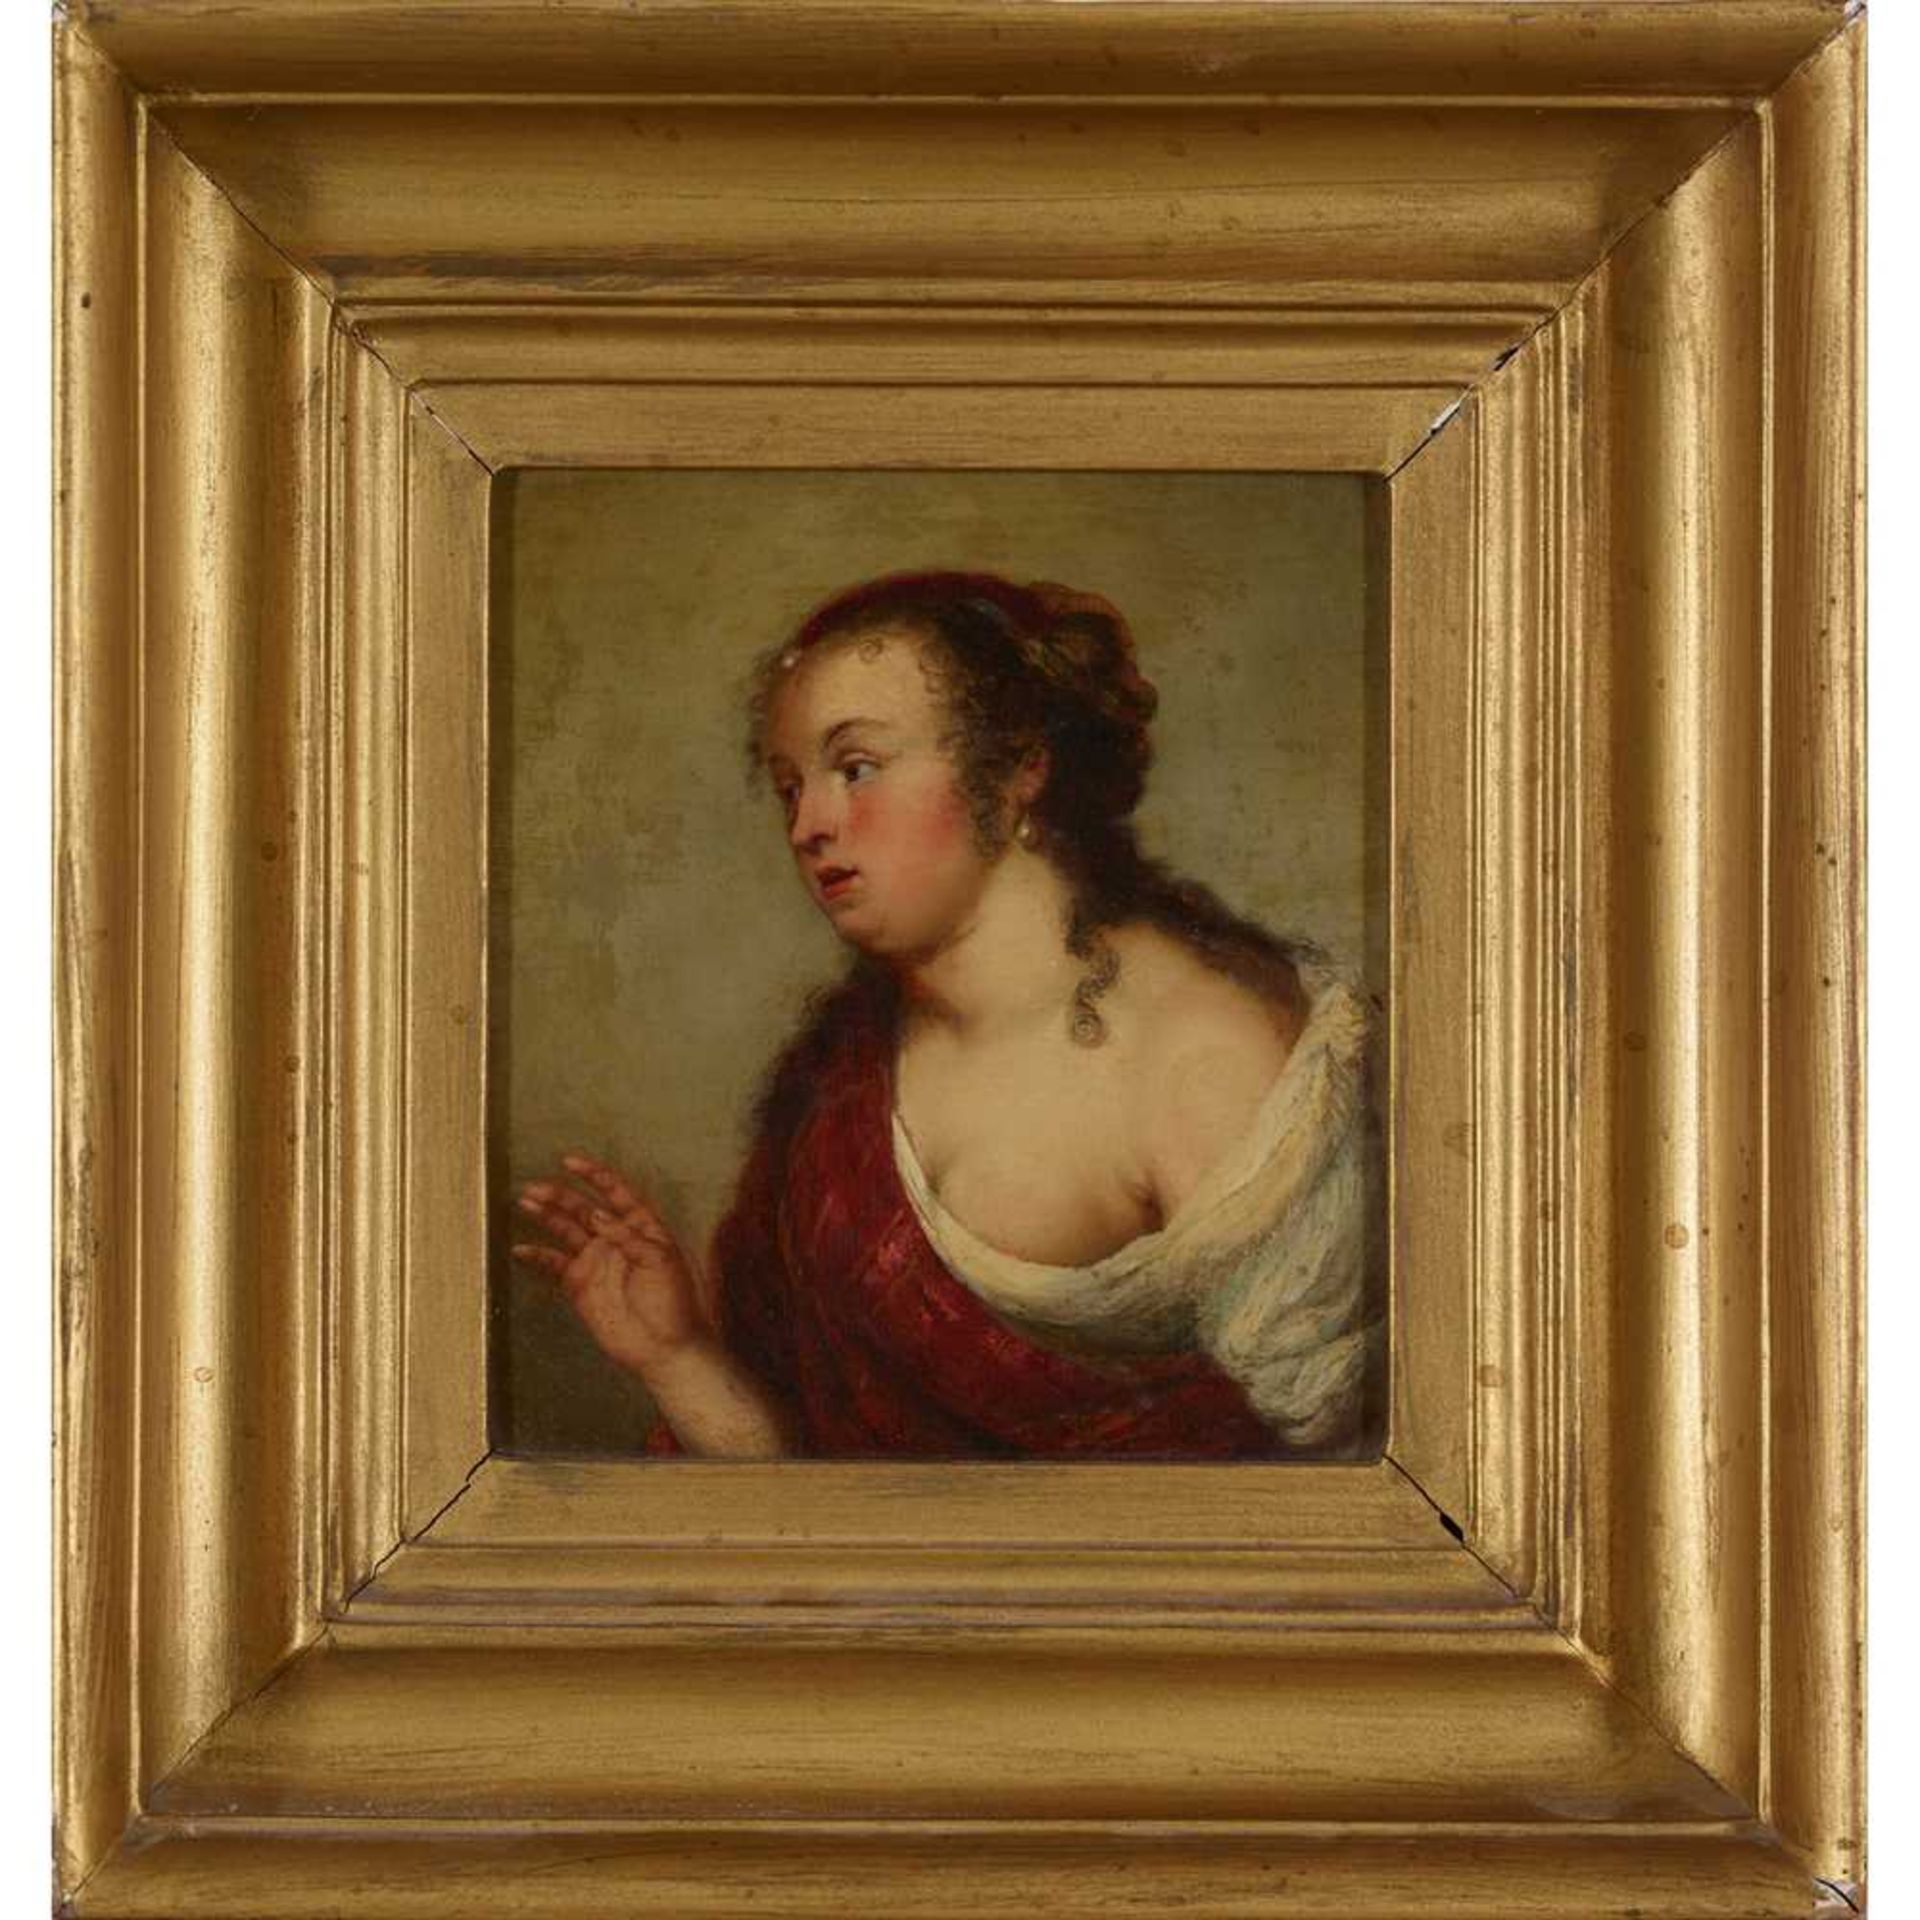 18TH CENTURY SCHOOL HALF-LENGTH PORTRAIT OF A WOMAN WITH A PATTERNED ROBE - Image 3 of 6